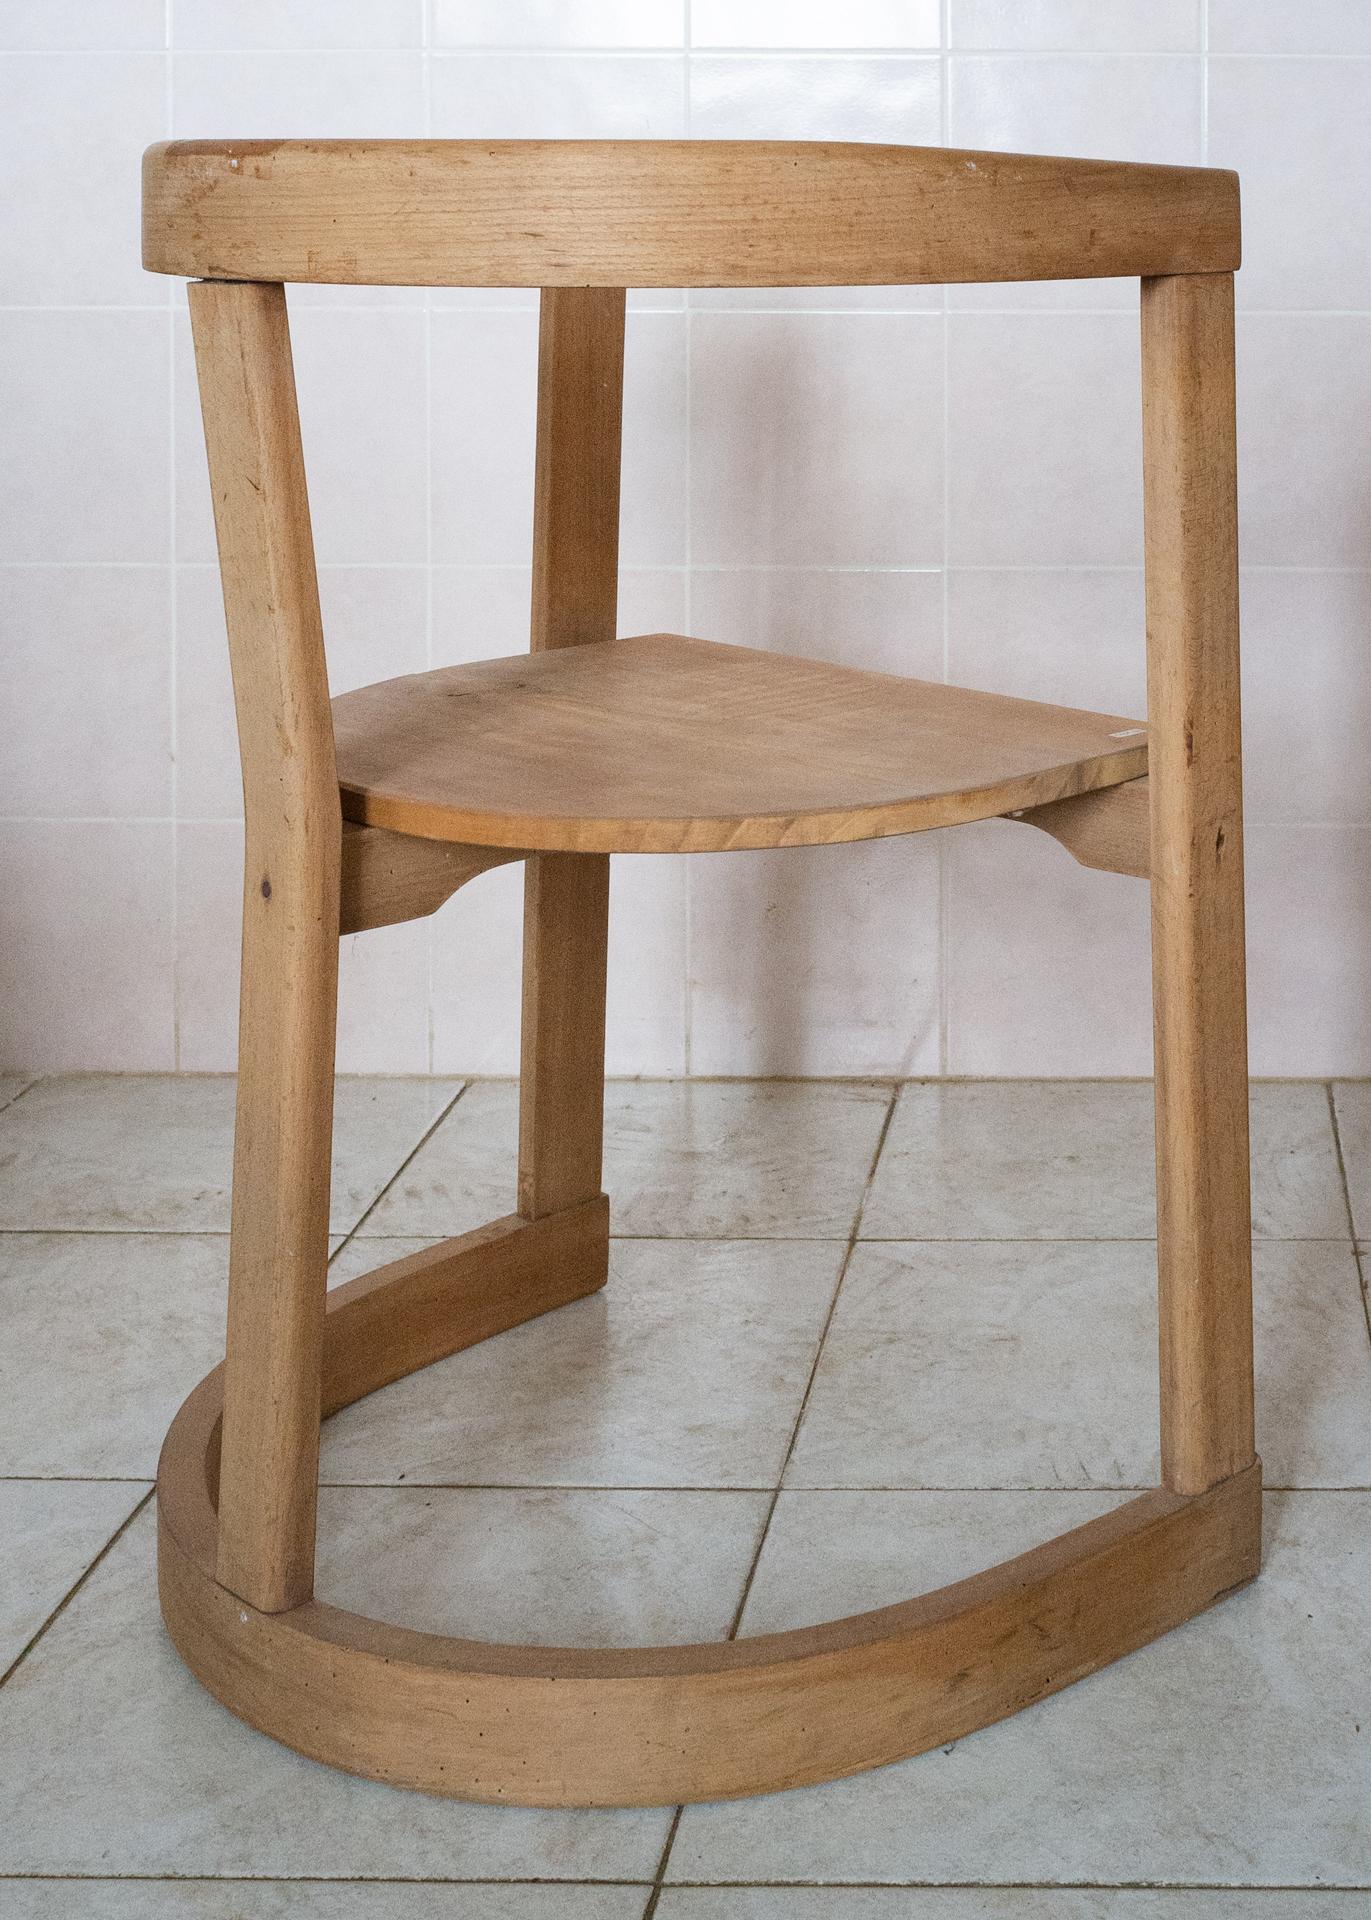 Hand-Crafted Wooden Prototype of a Chair For Sale